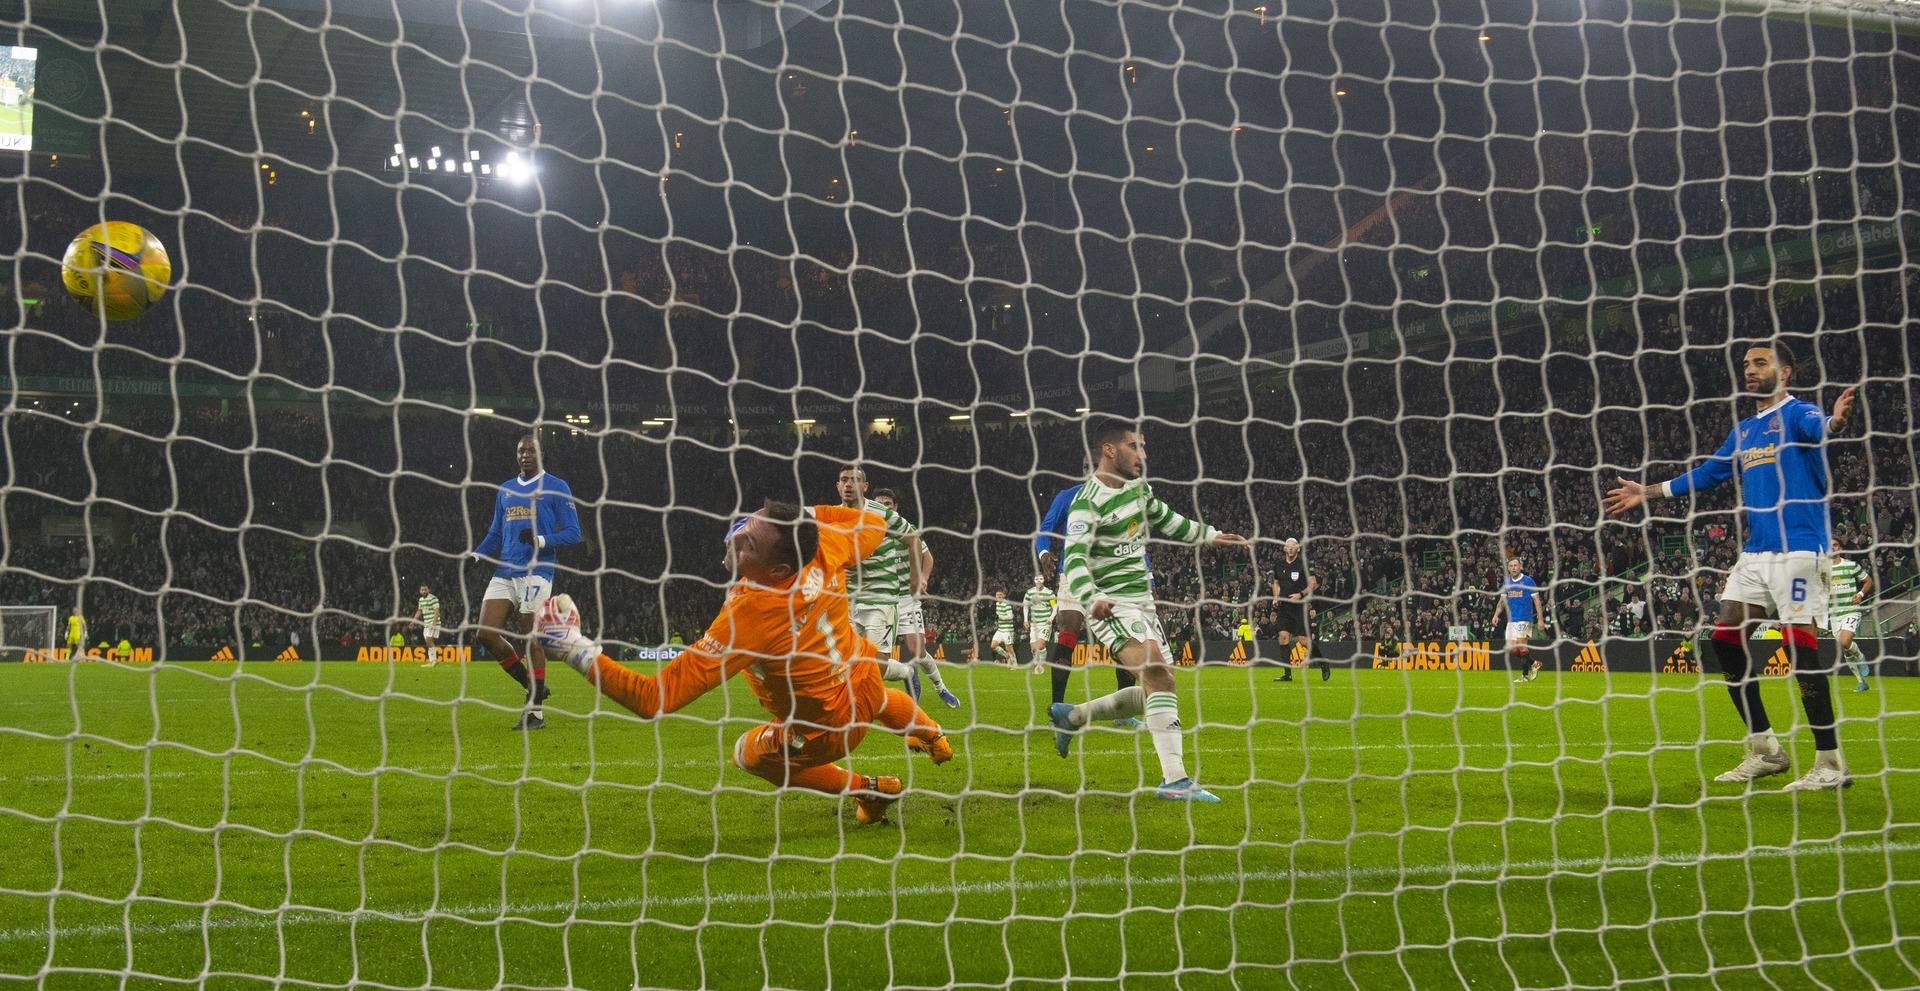 Derby defeat: A 3-0 win put Celtic top of the league in February. 